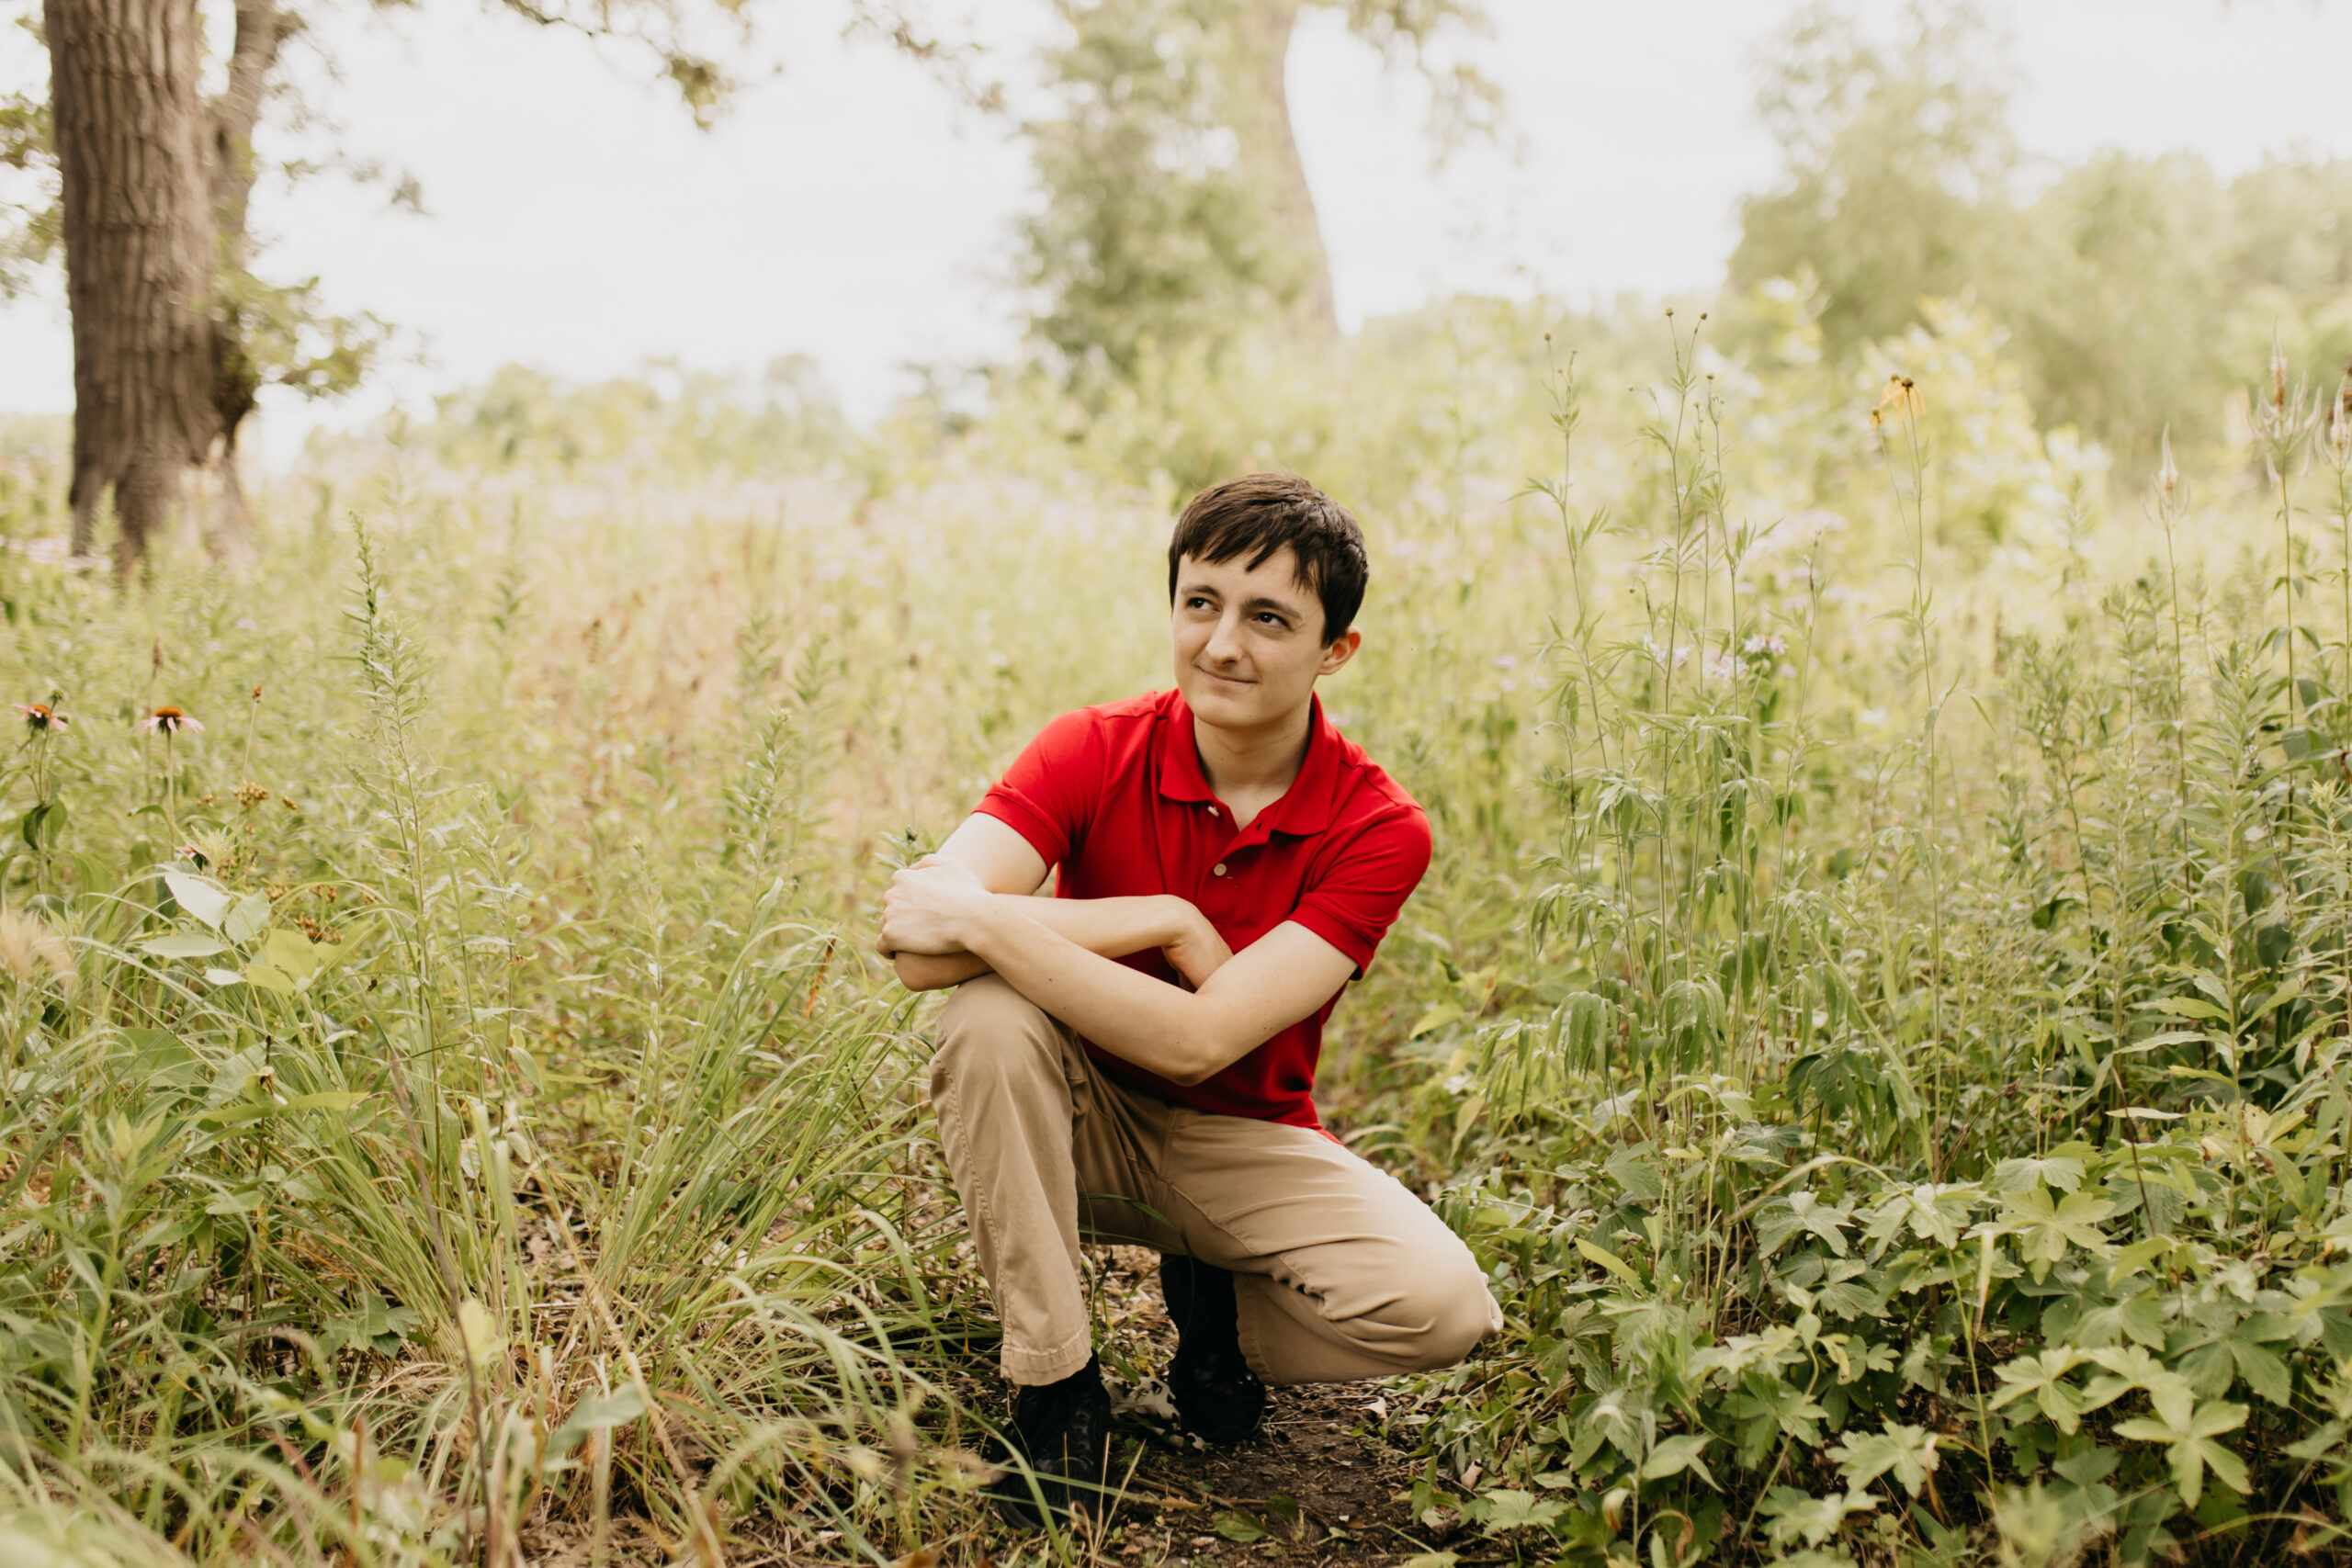 Sam, an Edina Senior, during his photo session at the forest and field location